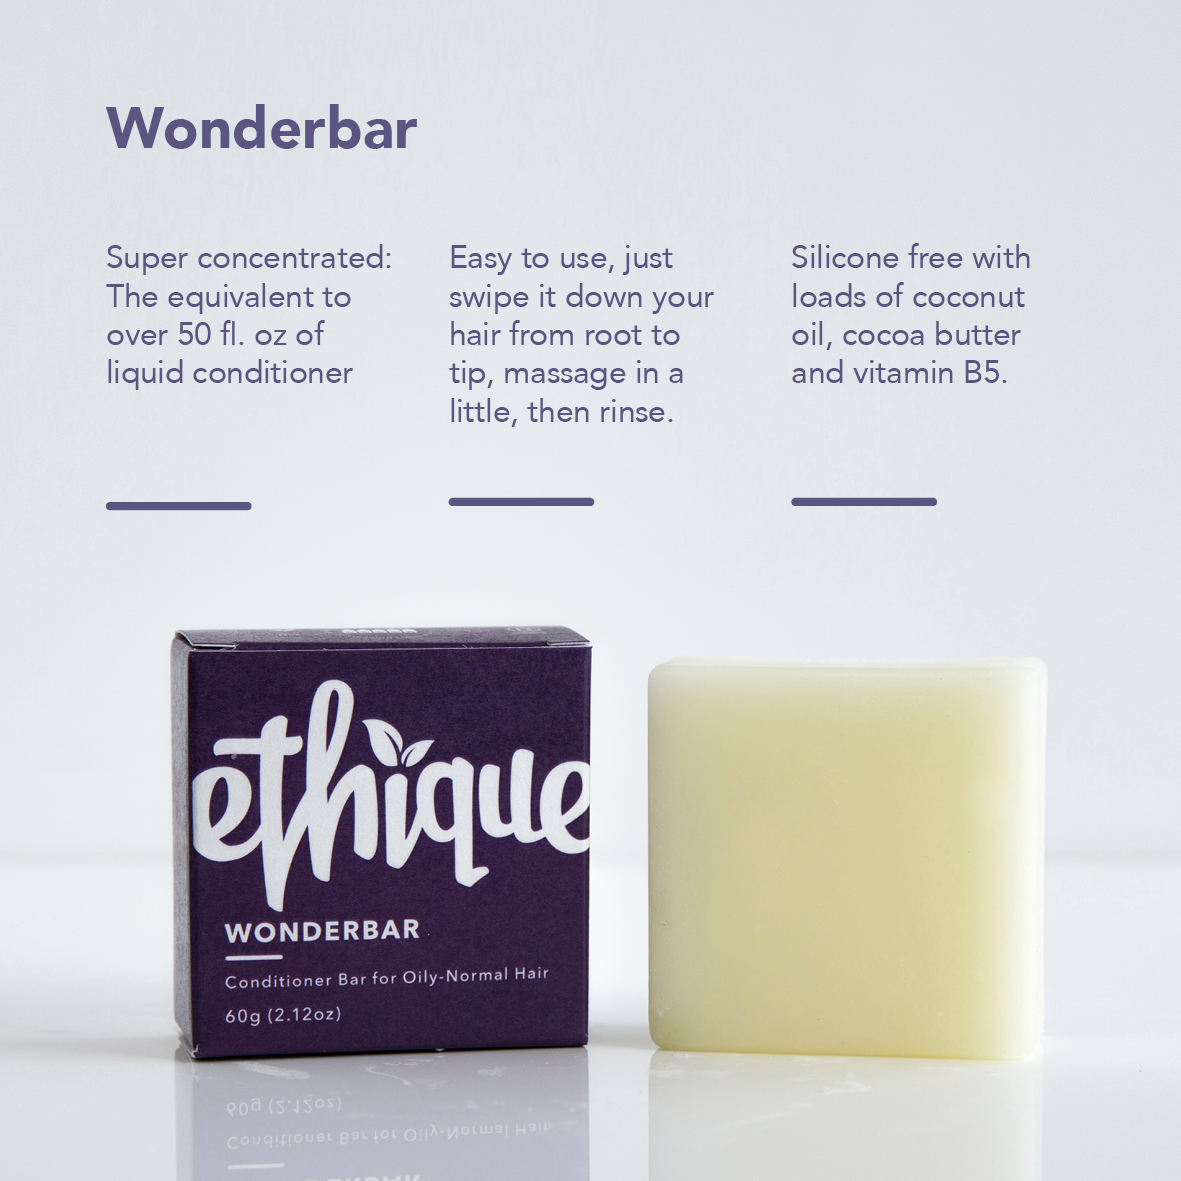 Ethique Wonderbar Conditioner Bar for Oily to Normal Hair - 2.12oz - image 5 of 9